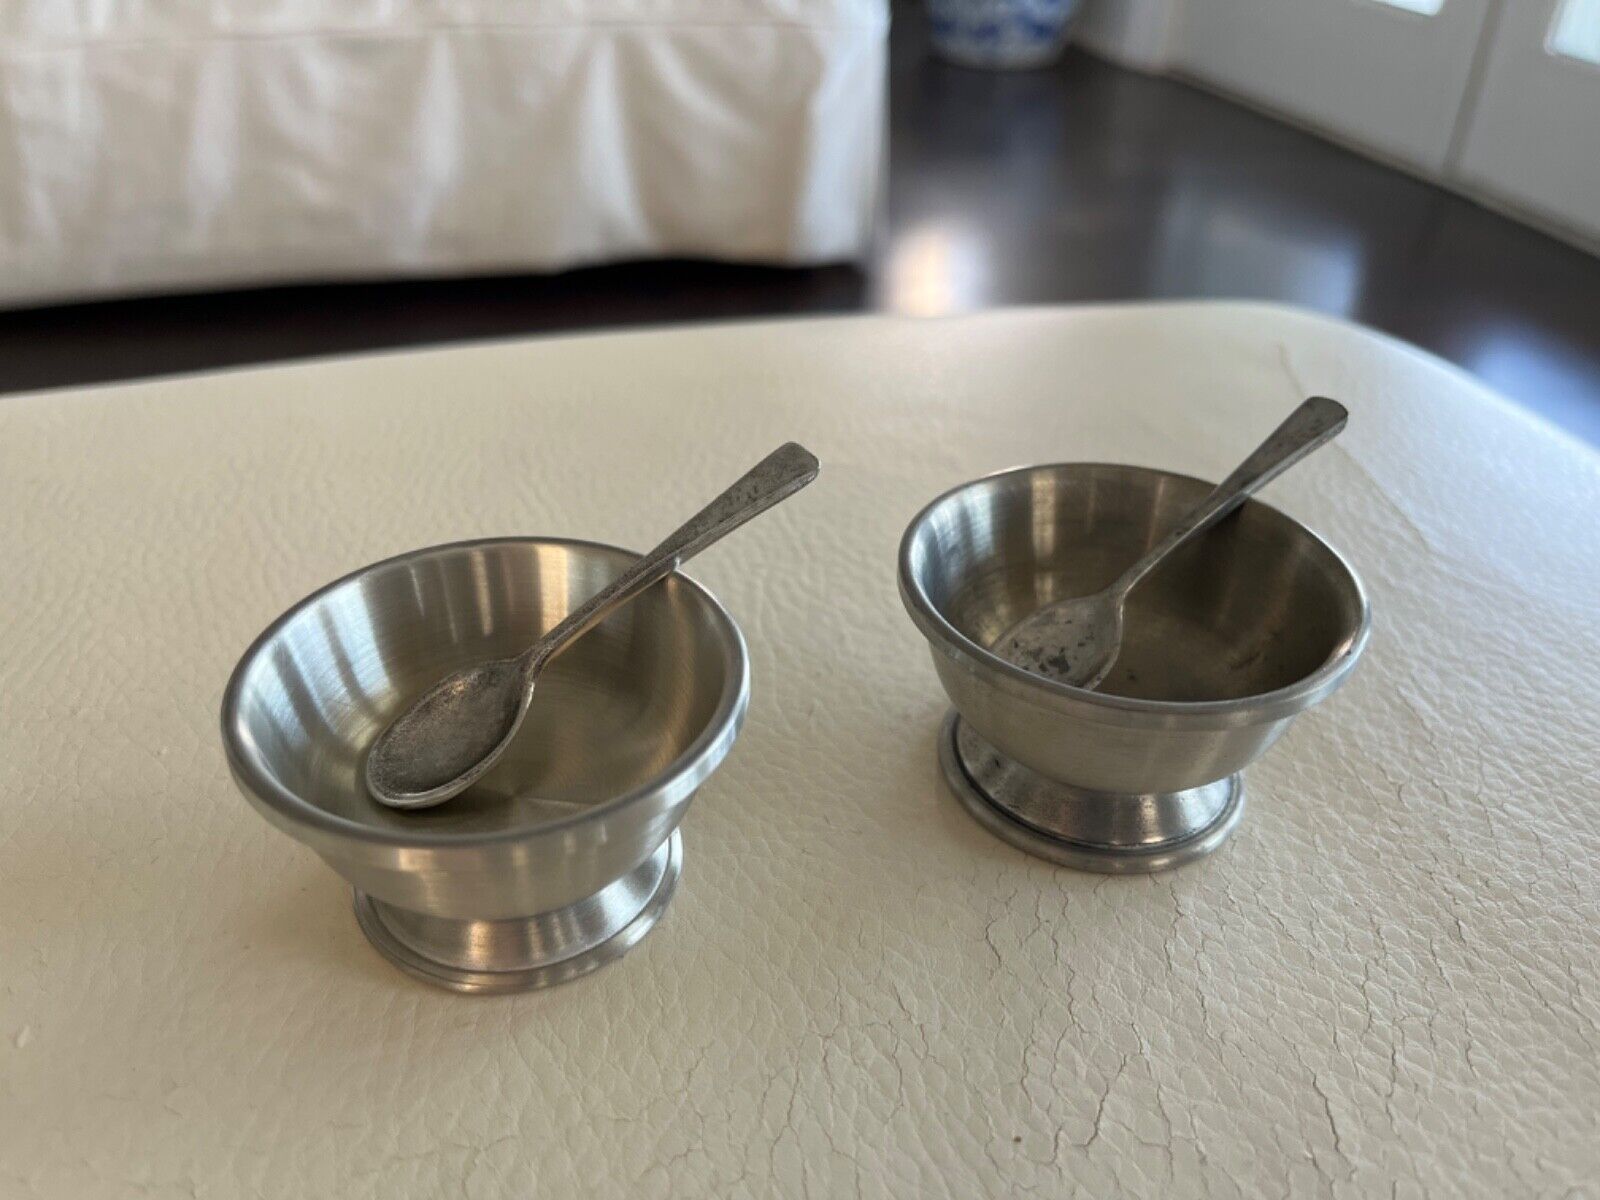 VINTAGE WOODBURY PEWTERERS PEWTER OPEN SALT BOWLS DISHES (2) WITH SPOONS USA